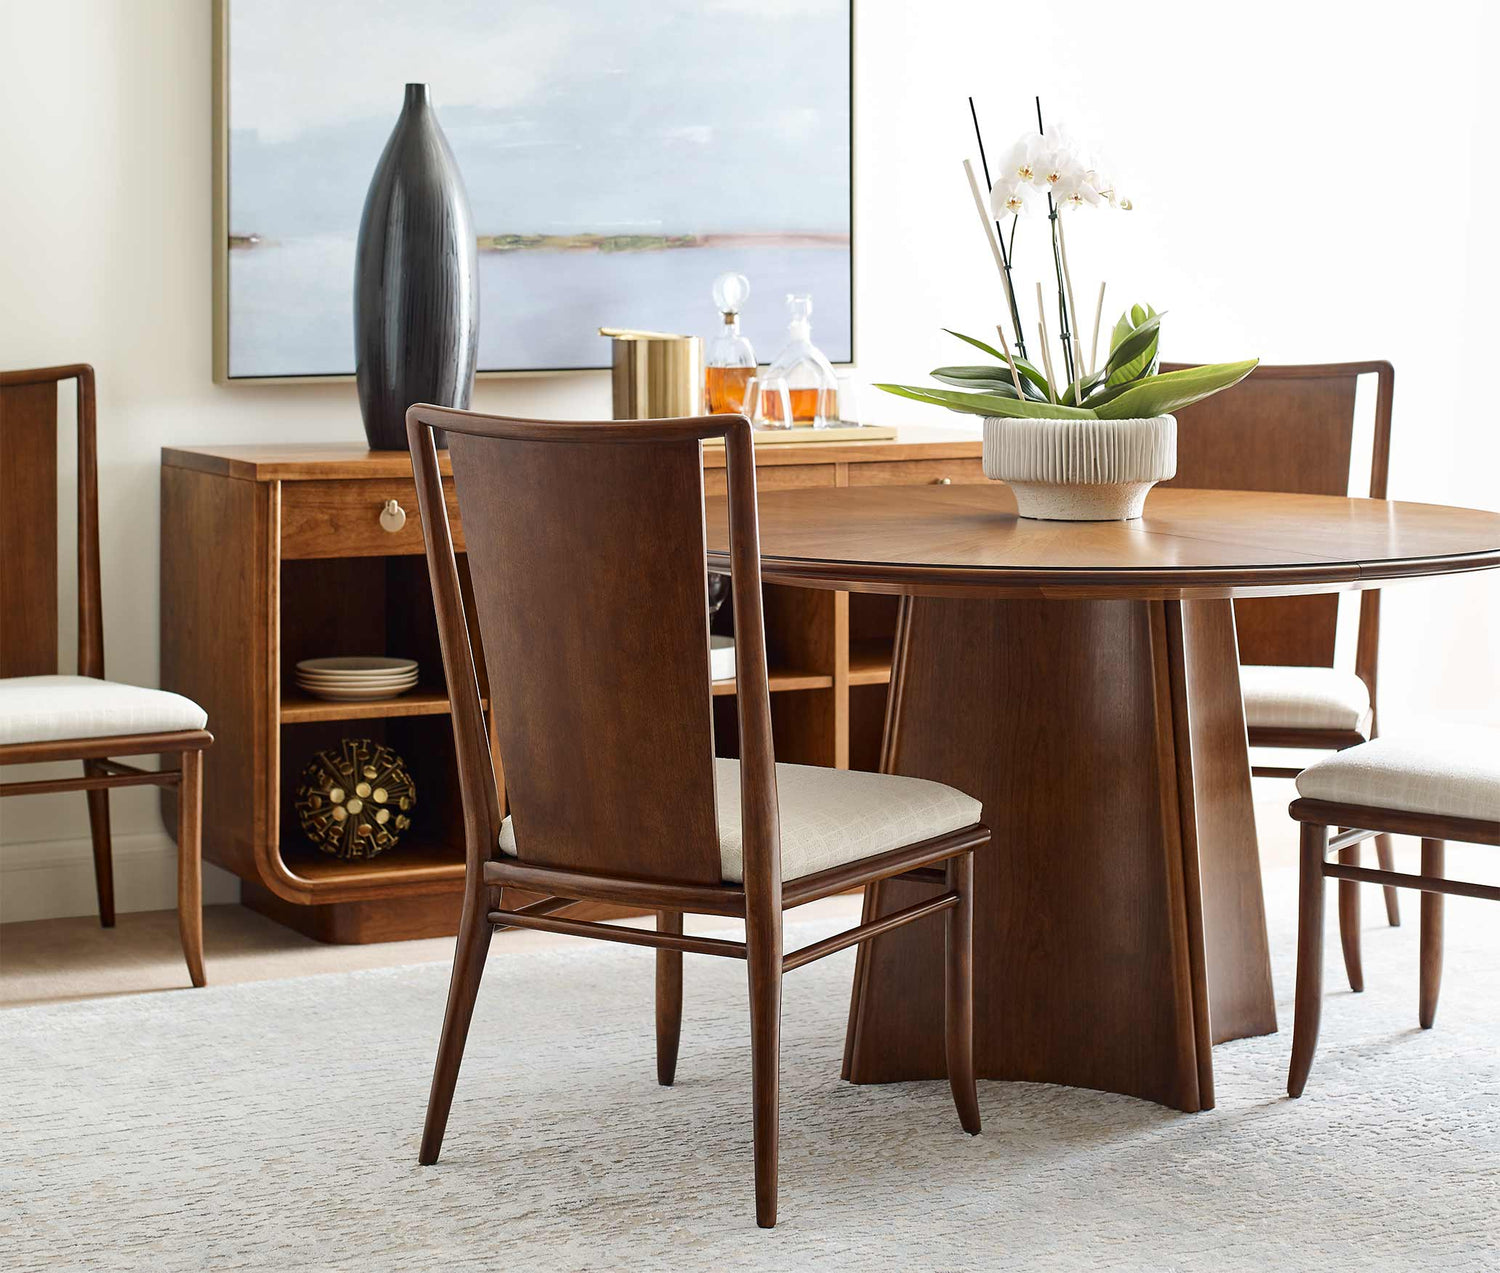 A Martine Sunburst Dining Table is surrounded by Martine Side Chairs, there is a Martine Server in the background with a drink tray and tall black vase on top of it